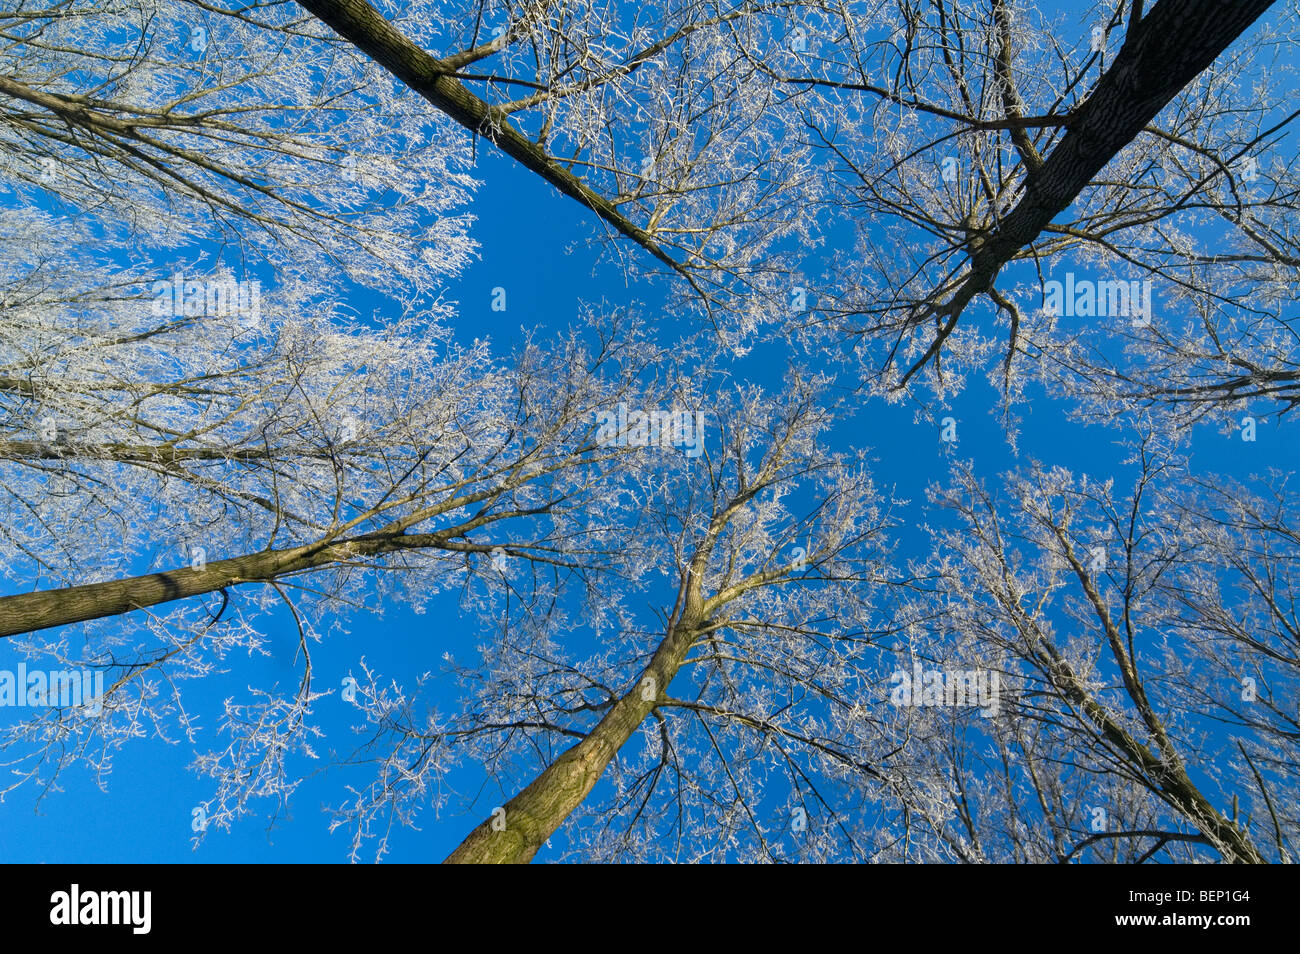 Branches of broad-leaved trees in deciduous forest in freezing winter cold covered in white frost / hoarfrost against blue sky Stock Photo